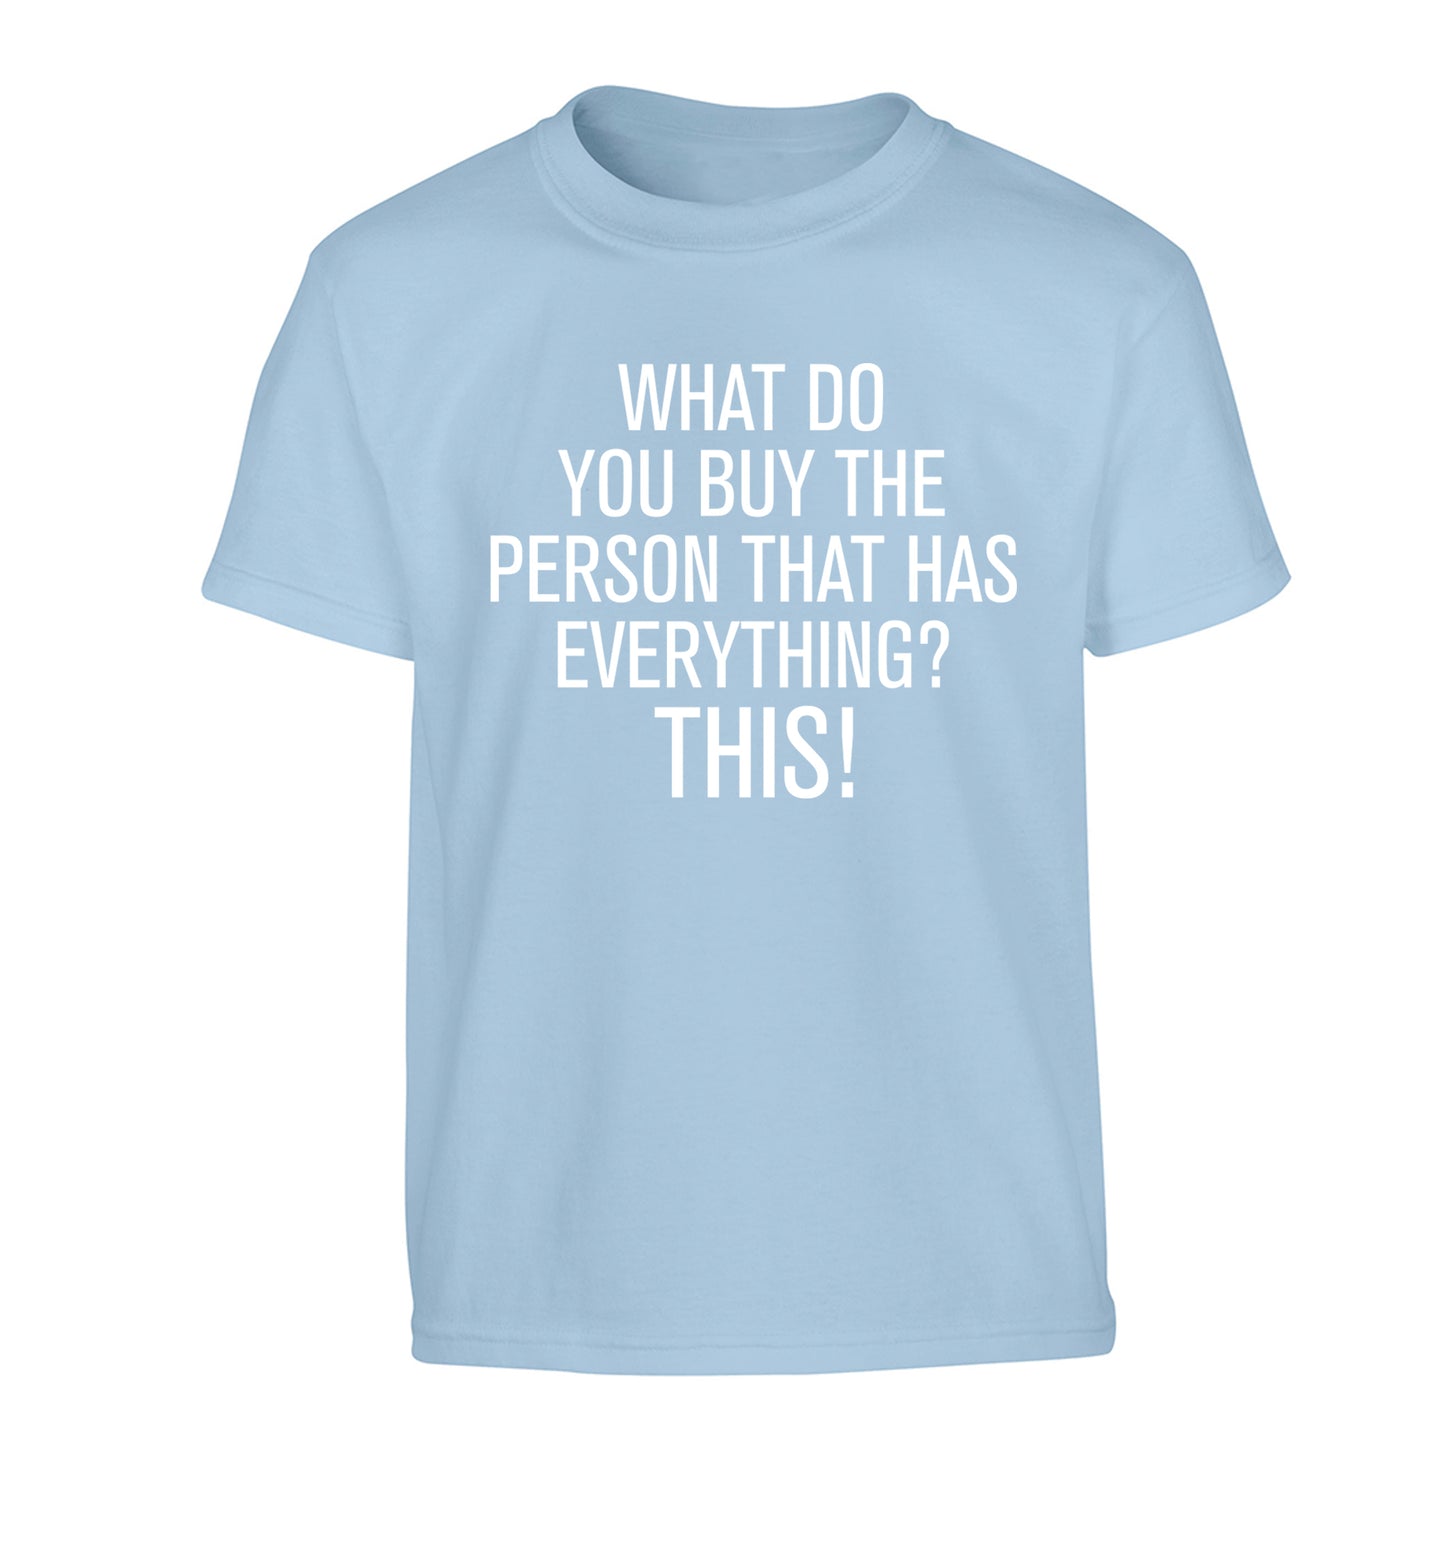 What do you buy the person that has everything? This! Children's light blue Tshirt 12-13 Years